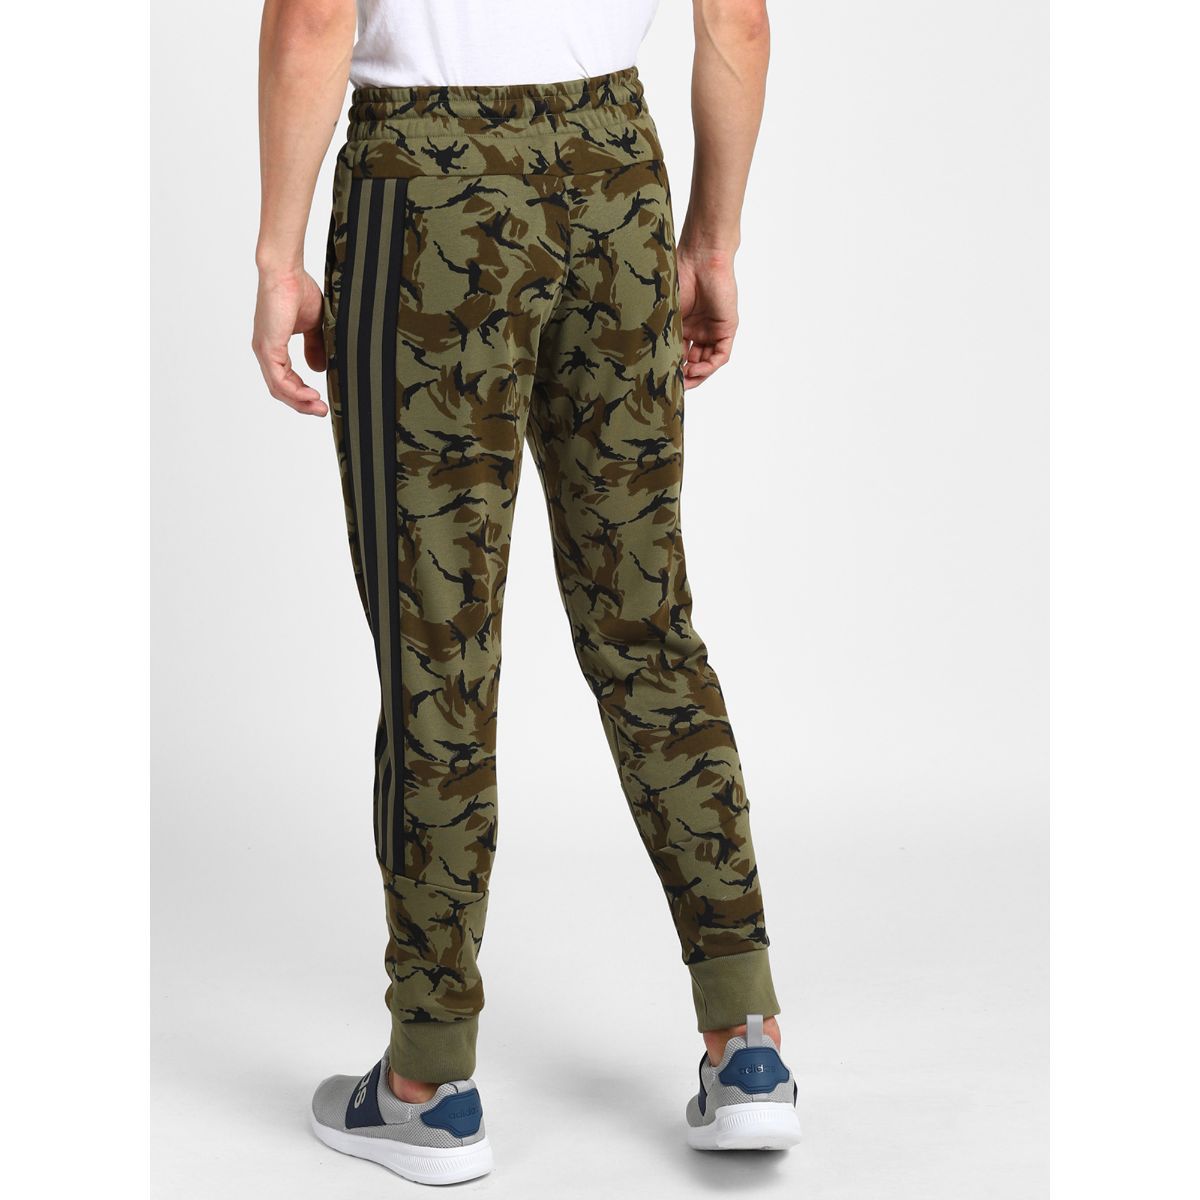 Buy Hopscotch Boys Cotton Camoglague Printed Jogger Track Pant in Gray Color   Lowest price in India GlowRoad